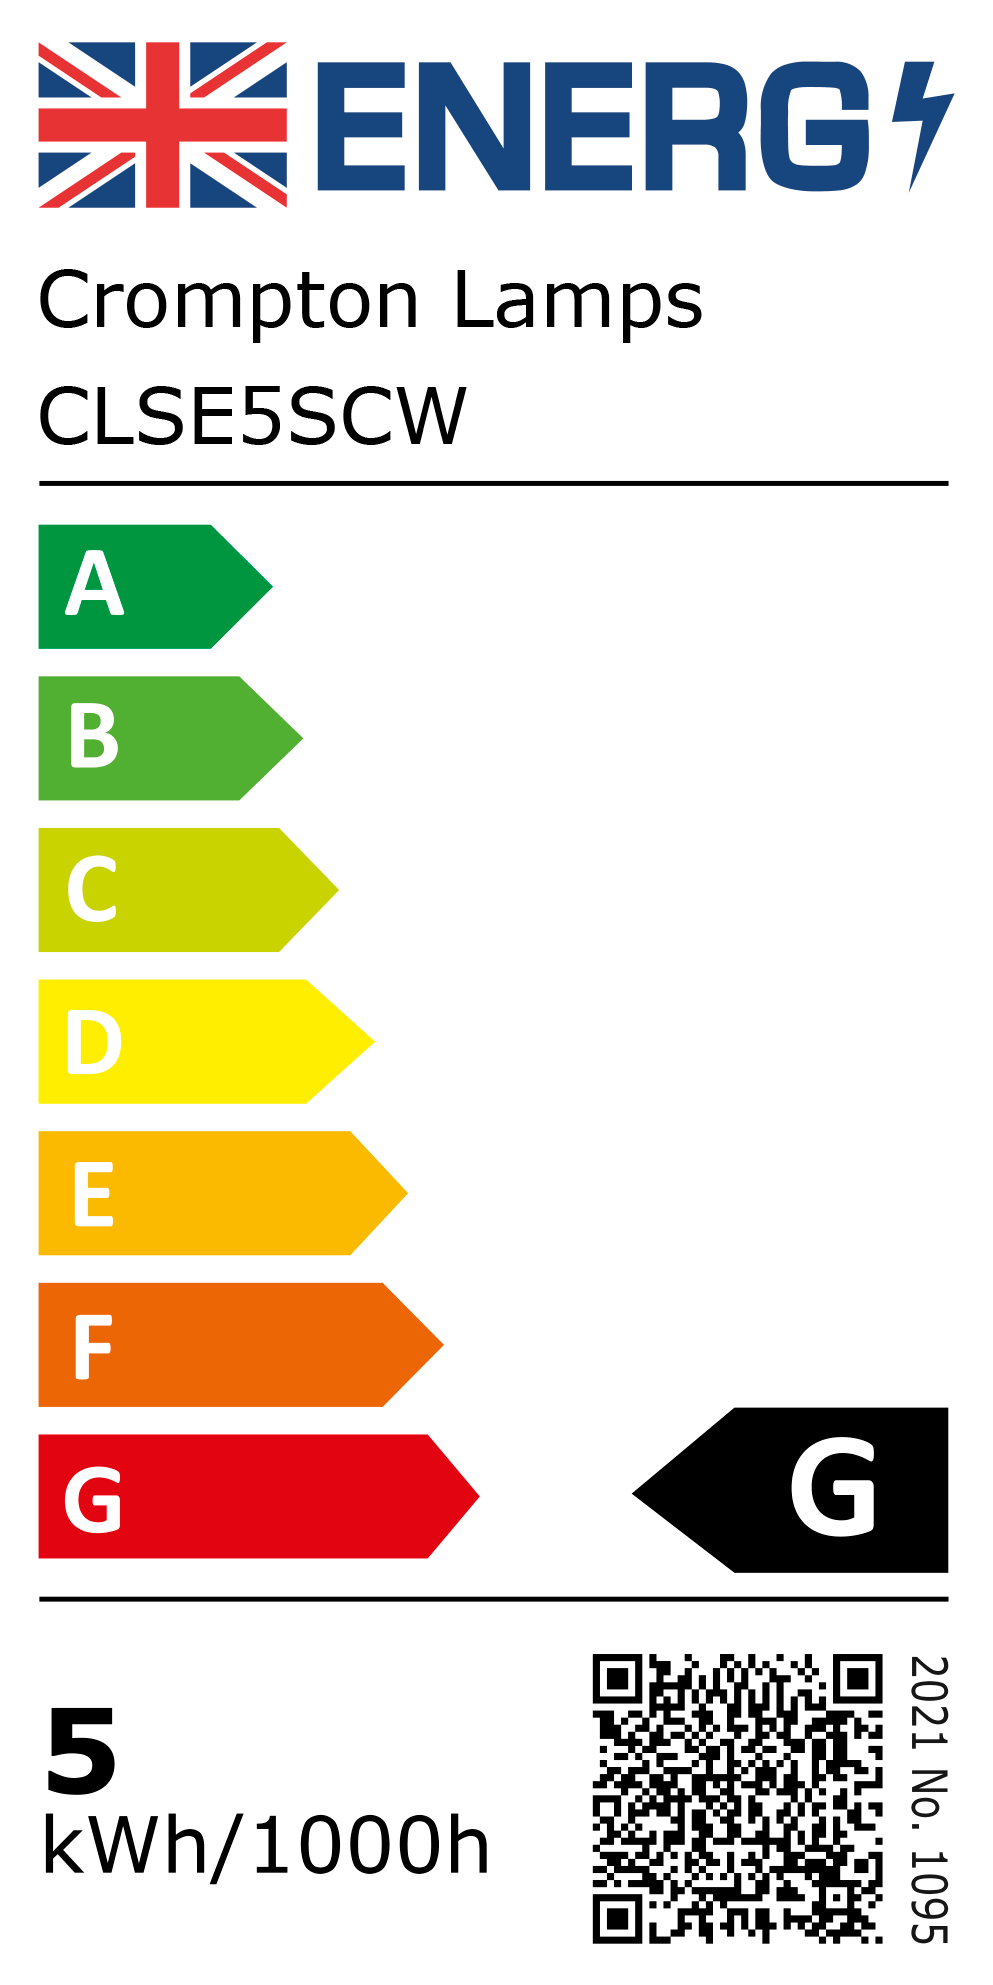 New 2021 Energy Rating Label: Stock Code CLSE5SCW